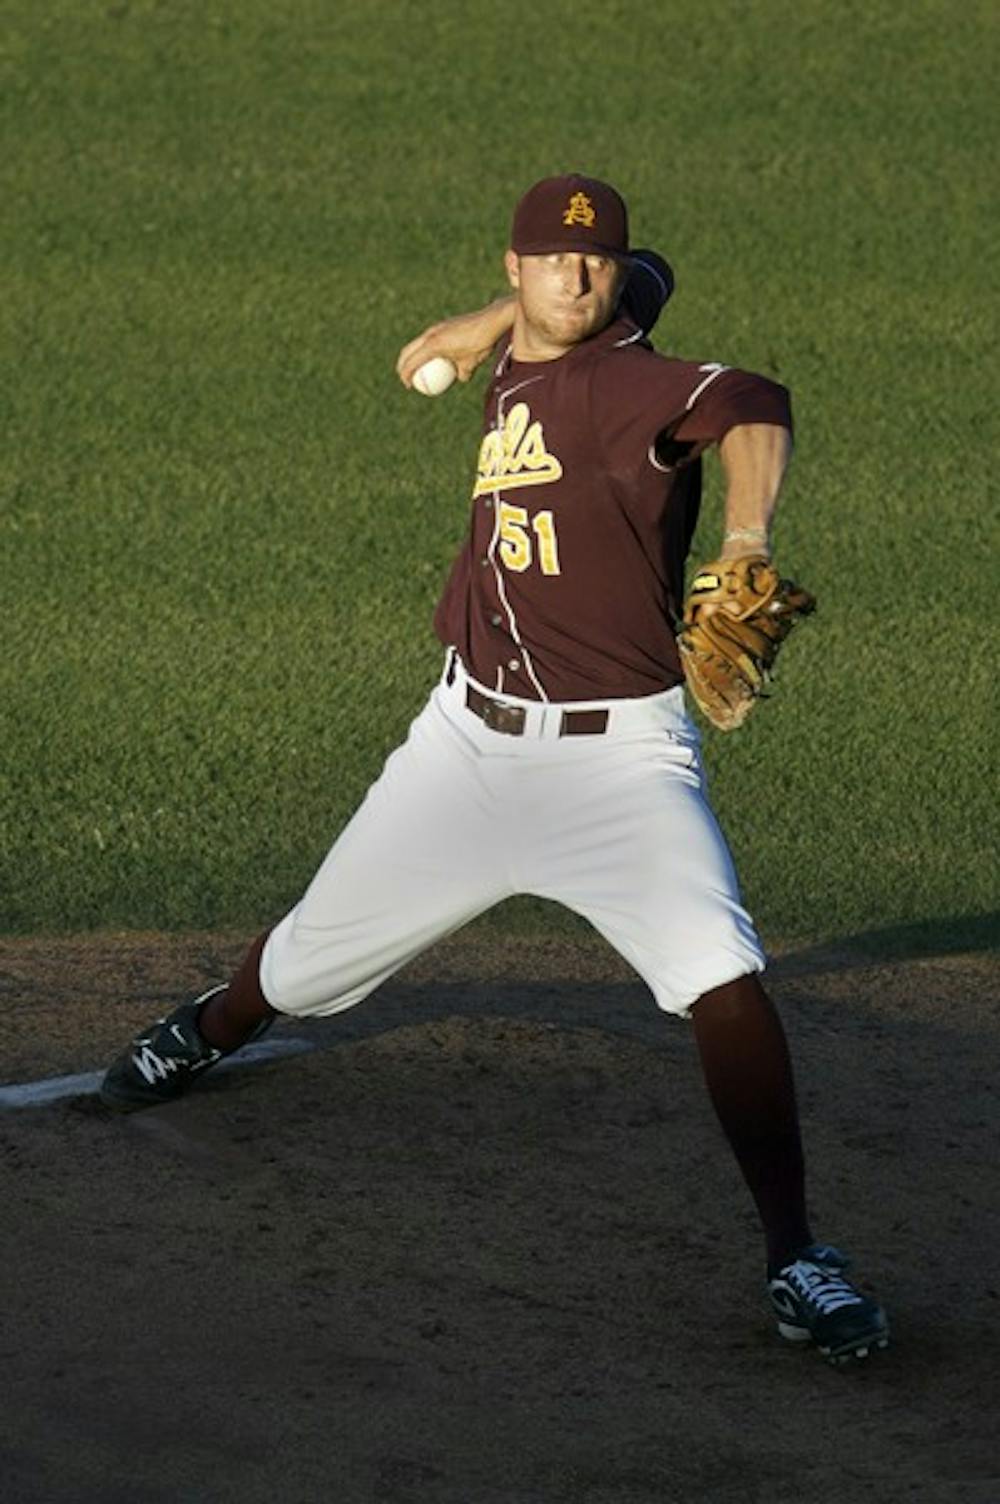 Jake Borup was starting pitcher for the Devils Sunday night in their win over Hawaii 8-4. (Photo by Scott Stuk)